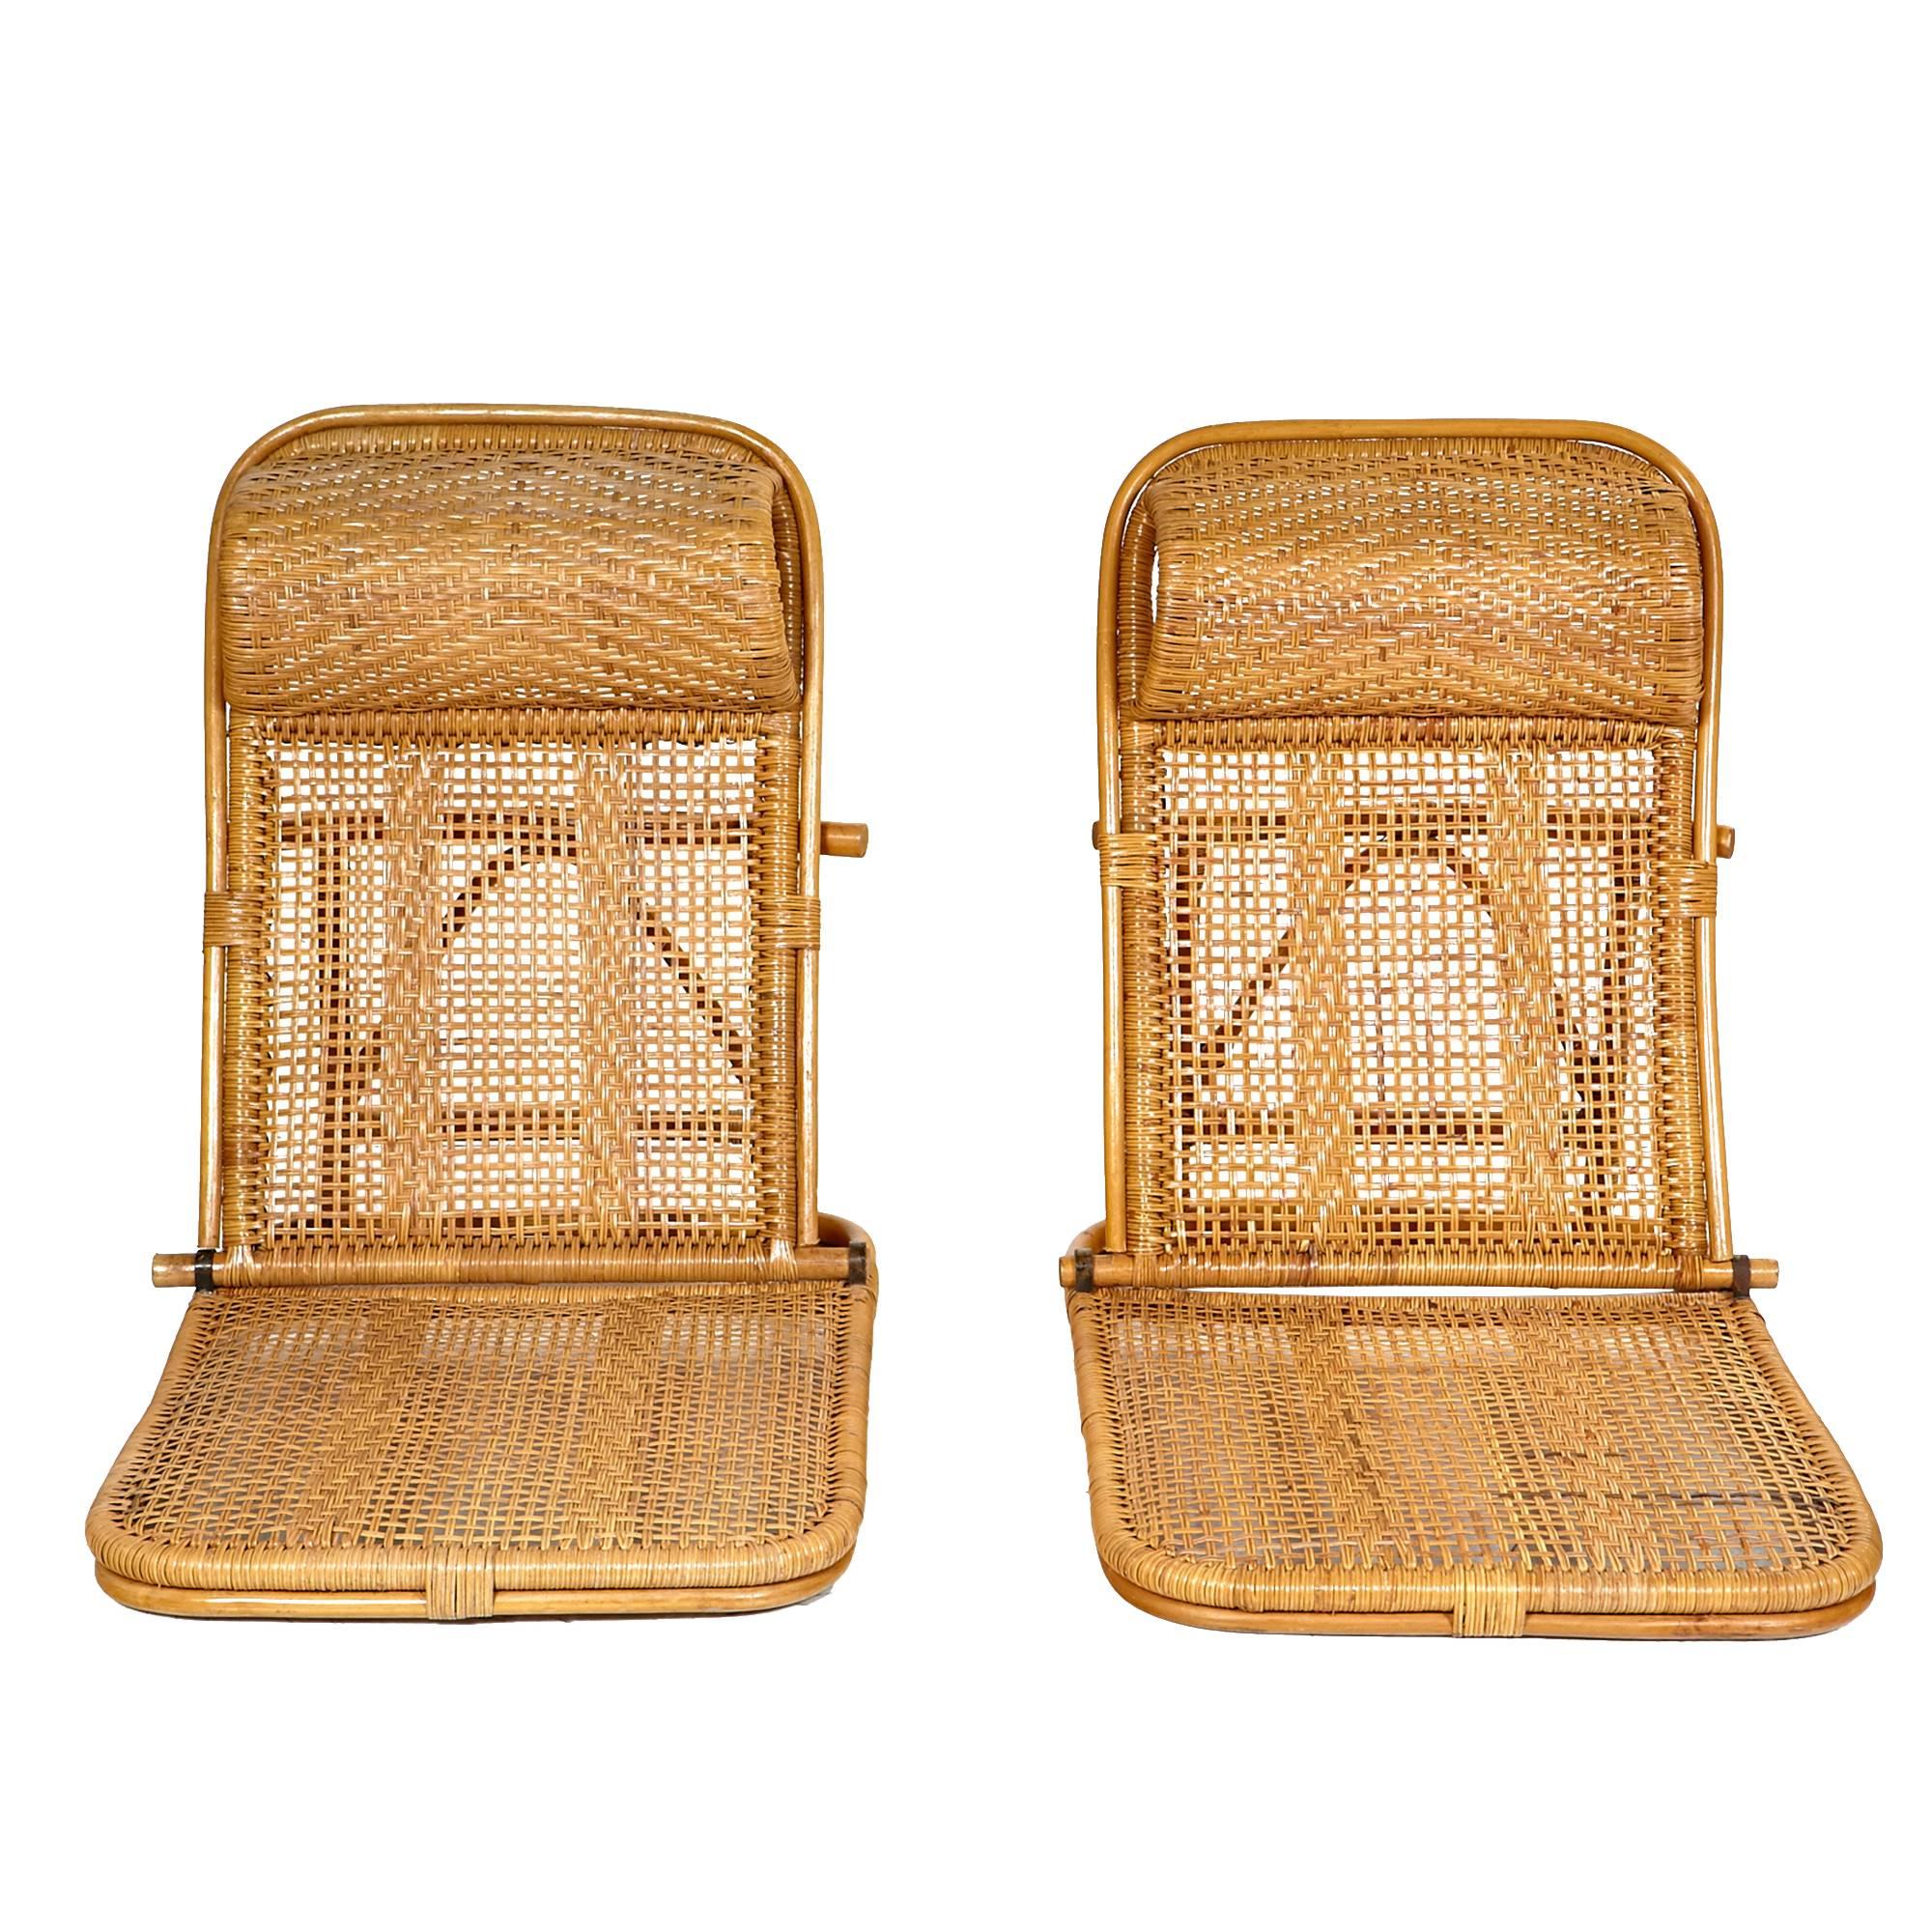 Mid-20th century pair of rattan and wicker folding beach chairs with built-in headrests. The chairs have a flat seat and two adjustable back positions; straight up and reclining angle. The chairs fold flat for storage. Excellent condition. Unmarked.